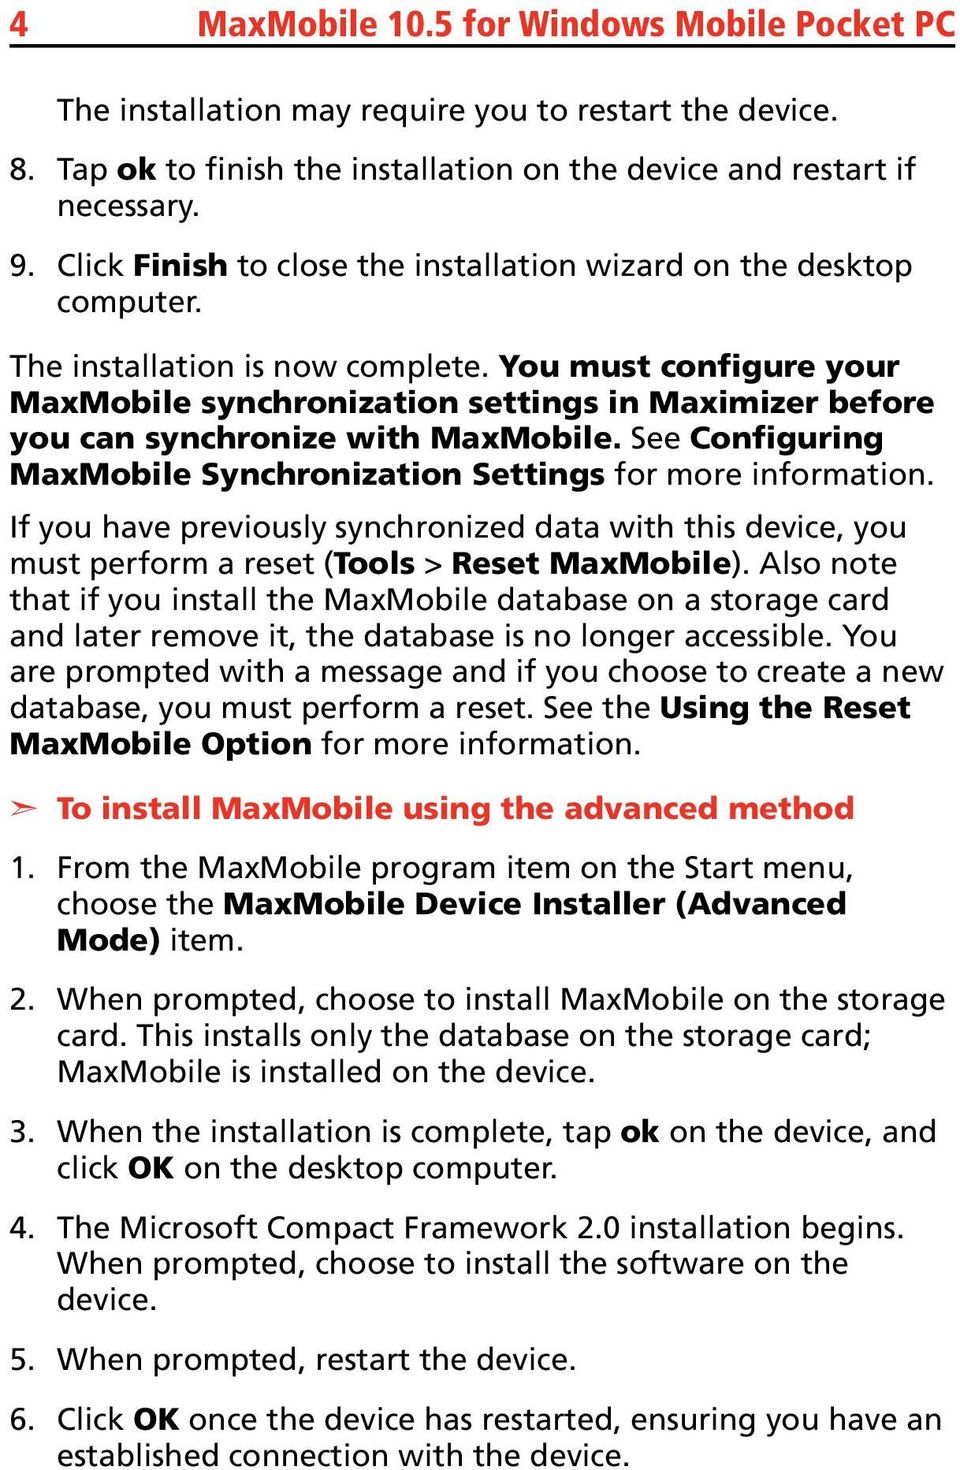 You must configure your MaxMobile synchronization settings in Maximizer before you can synchronize with MaxMobile. See Configuring MaxMobile Synchronization Settings for more information.